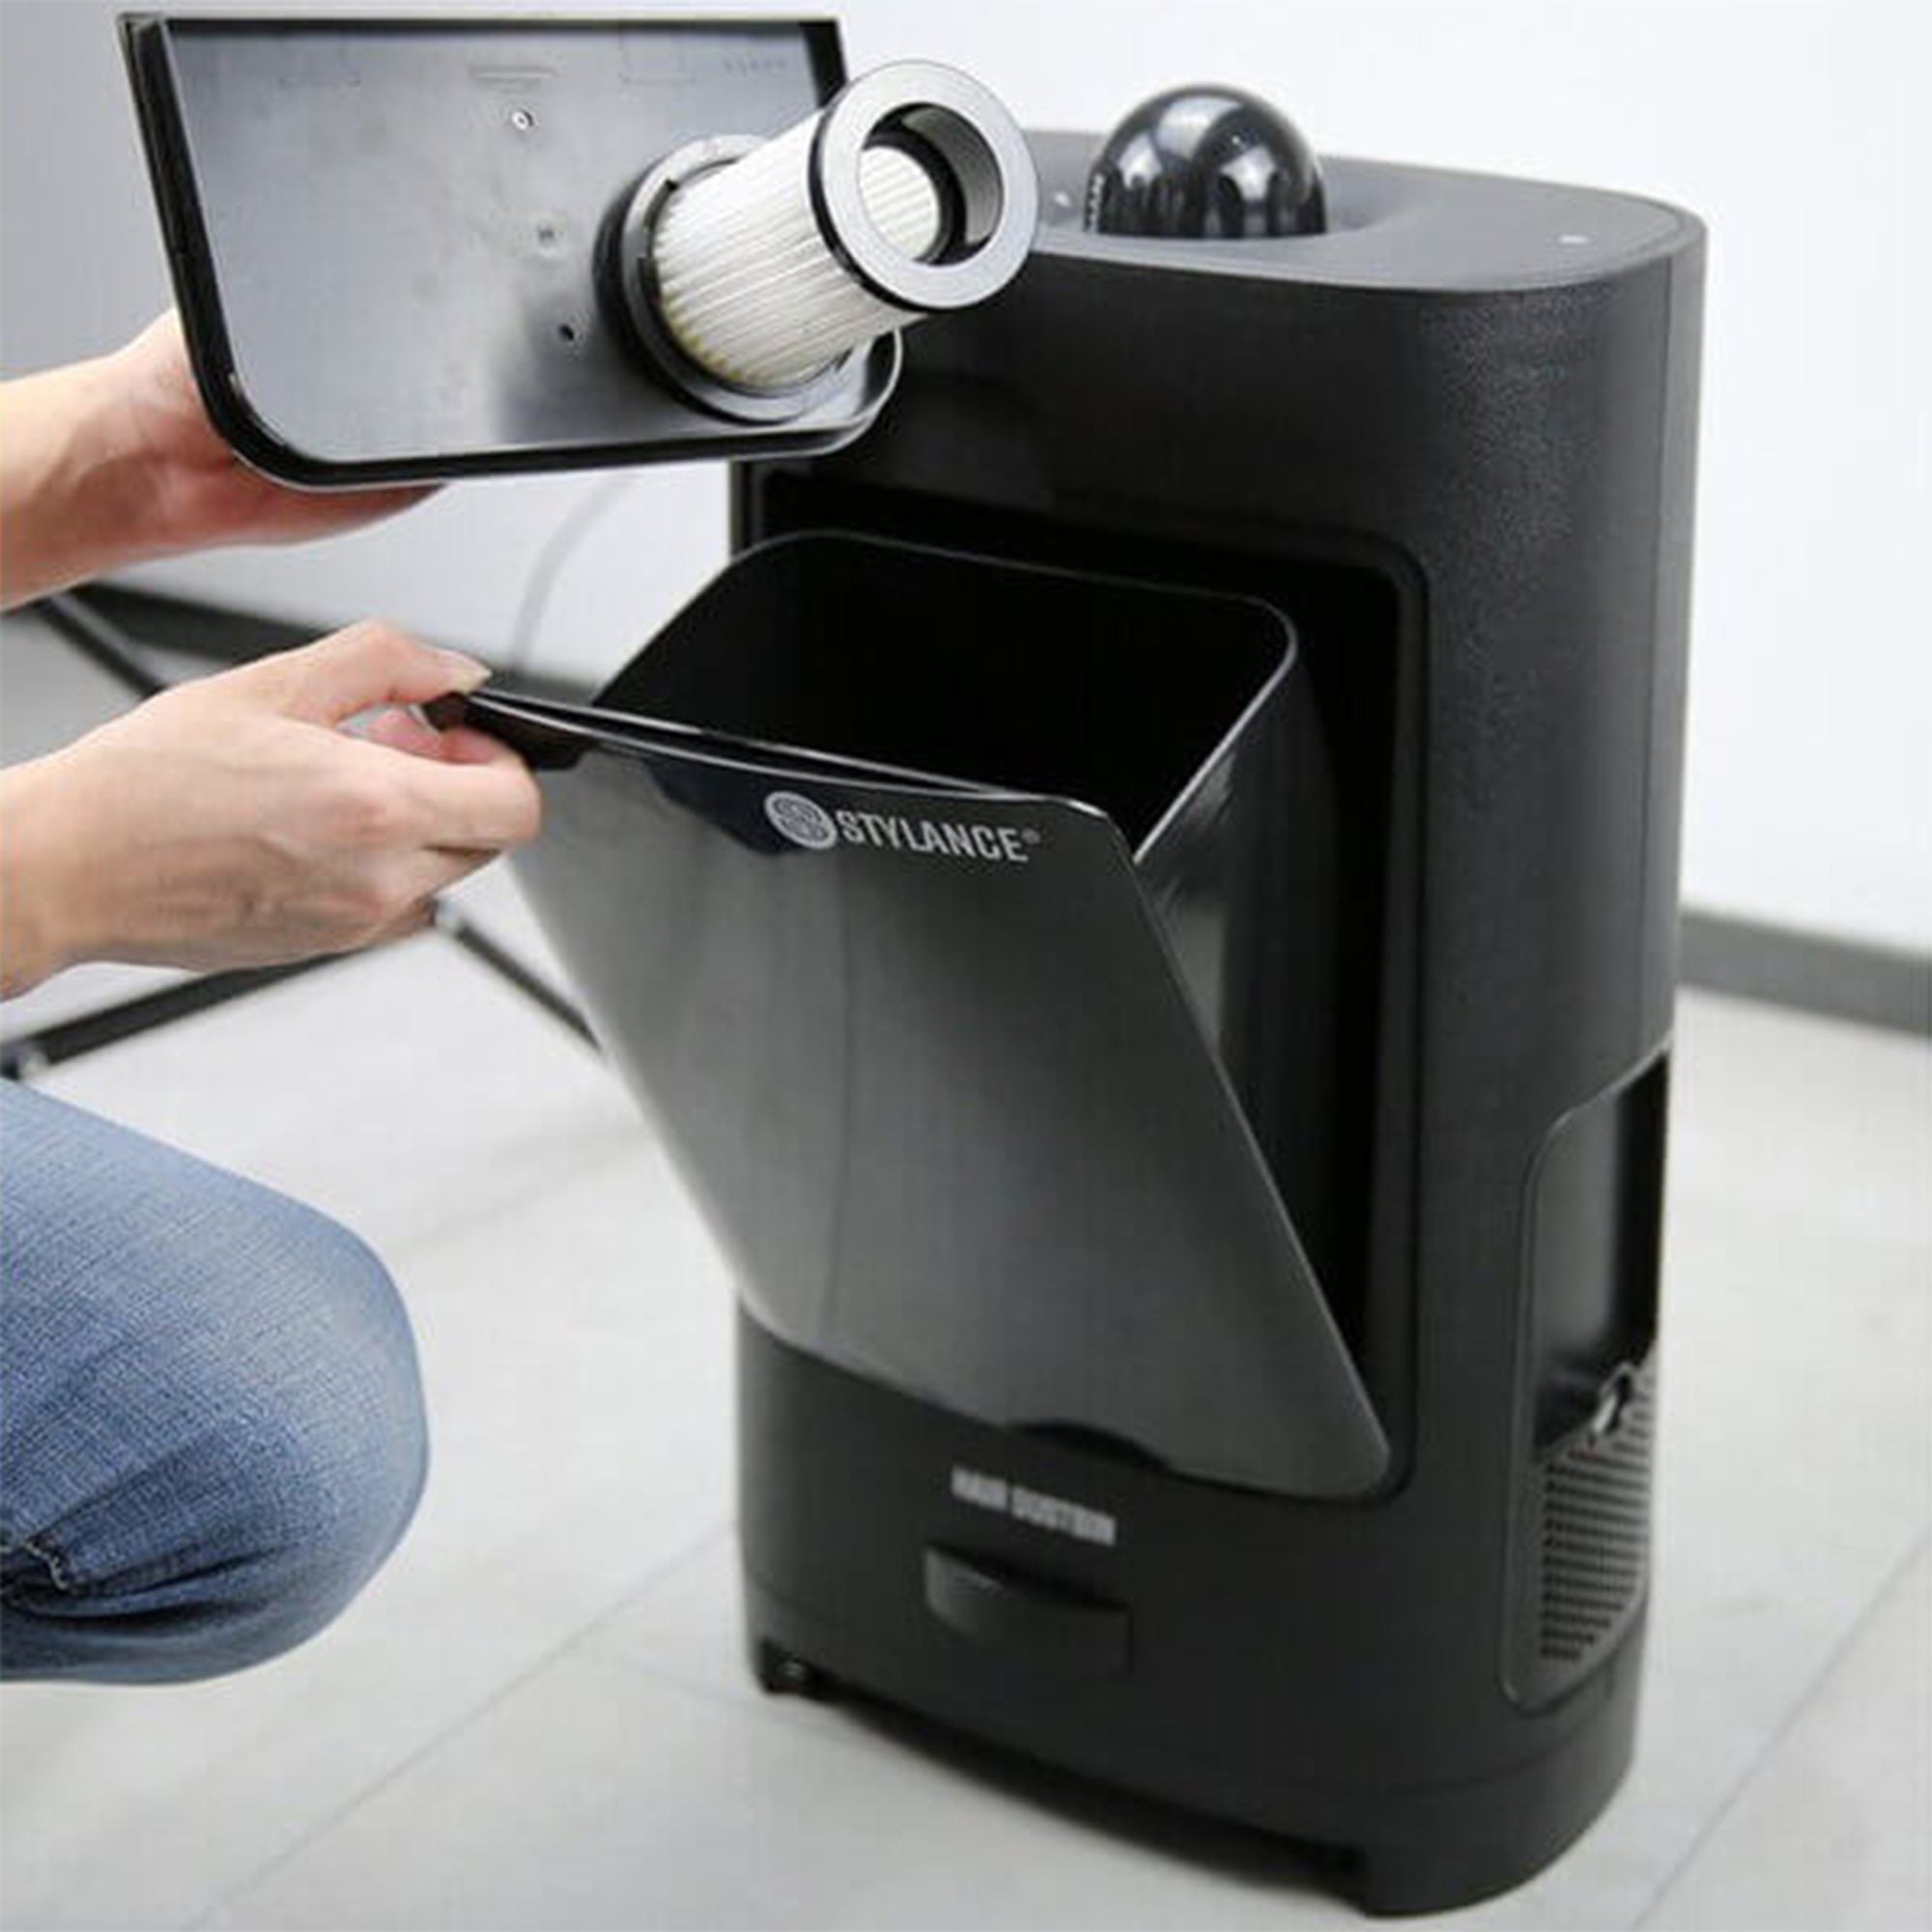 Stylance - Automatic Vacuum Hair Suction Dustbin Infrared Sensor 1400W